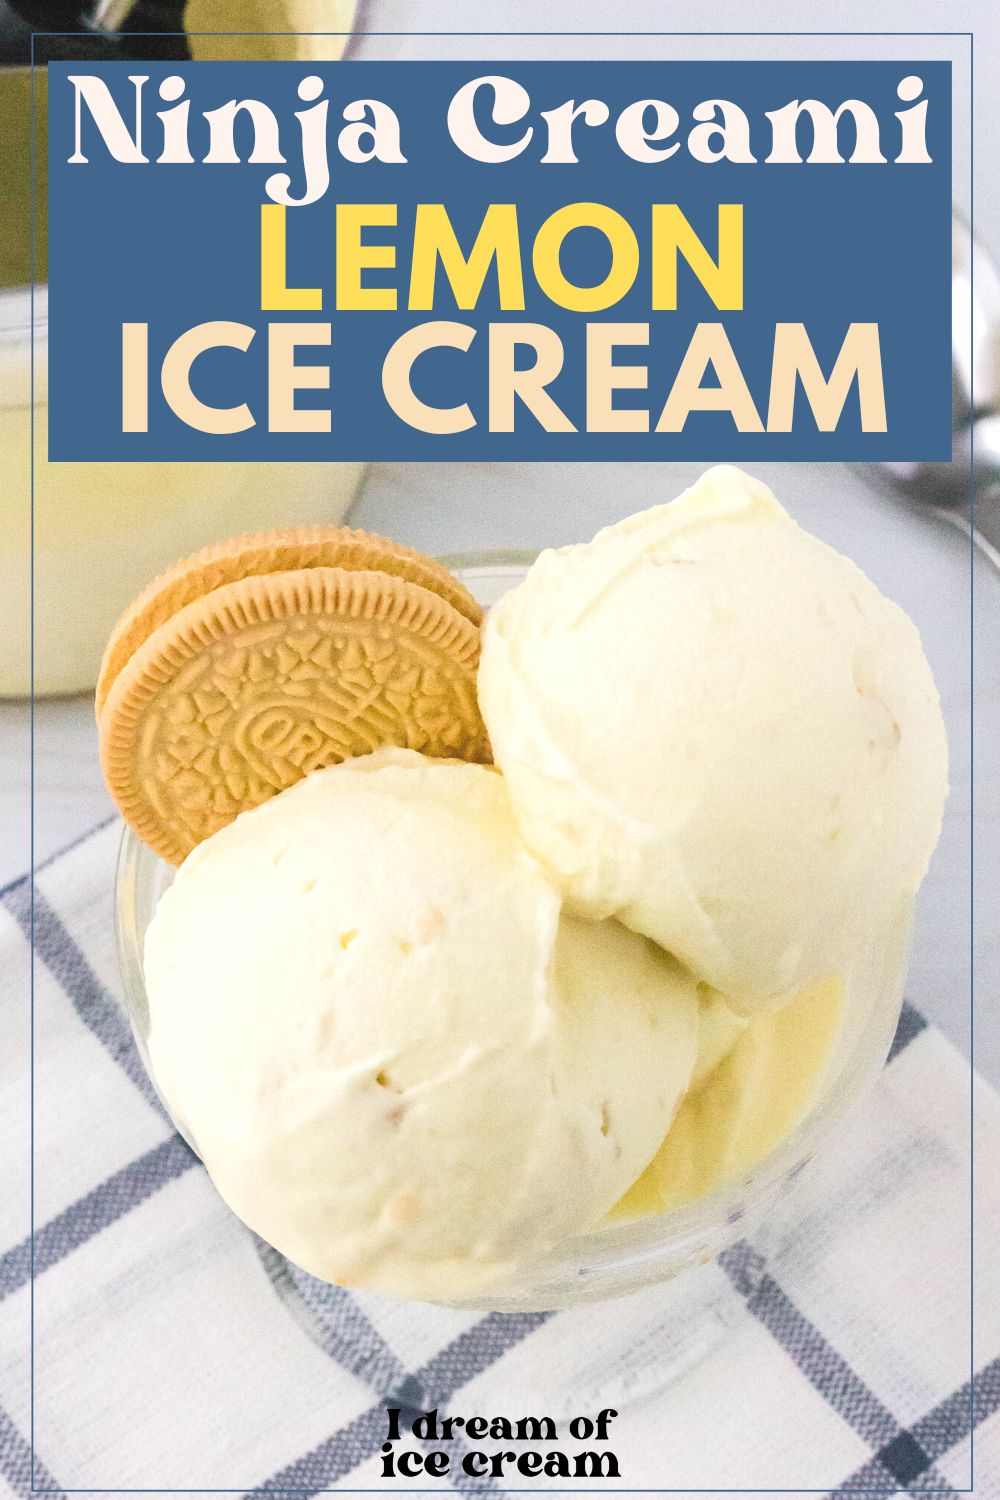 three scoops of Ninja Creami lemon ice cream served in a glass dessert cup with a lemon Oreo cookie.